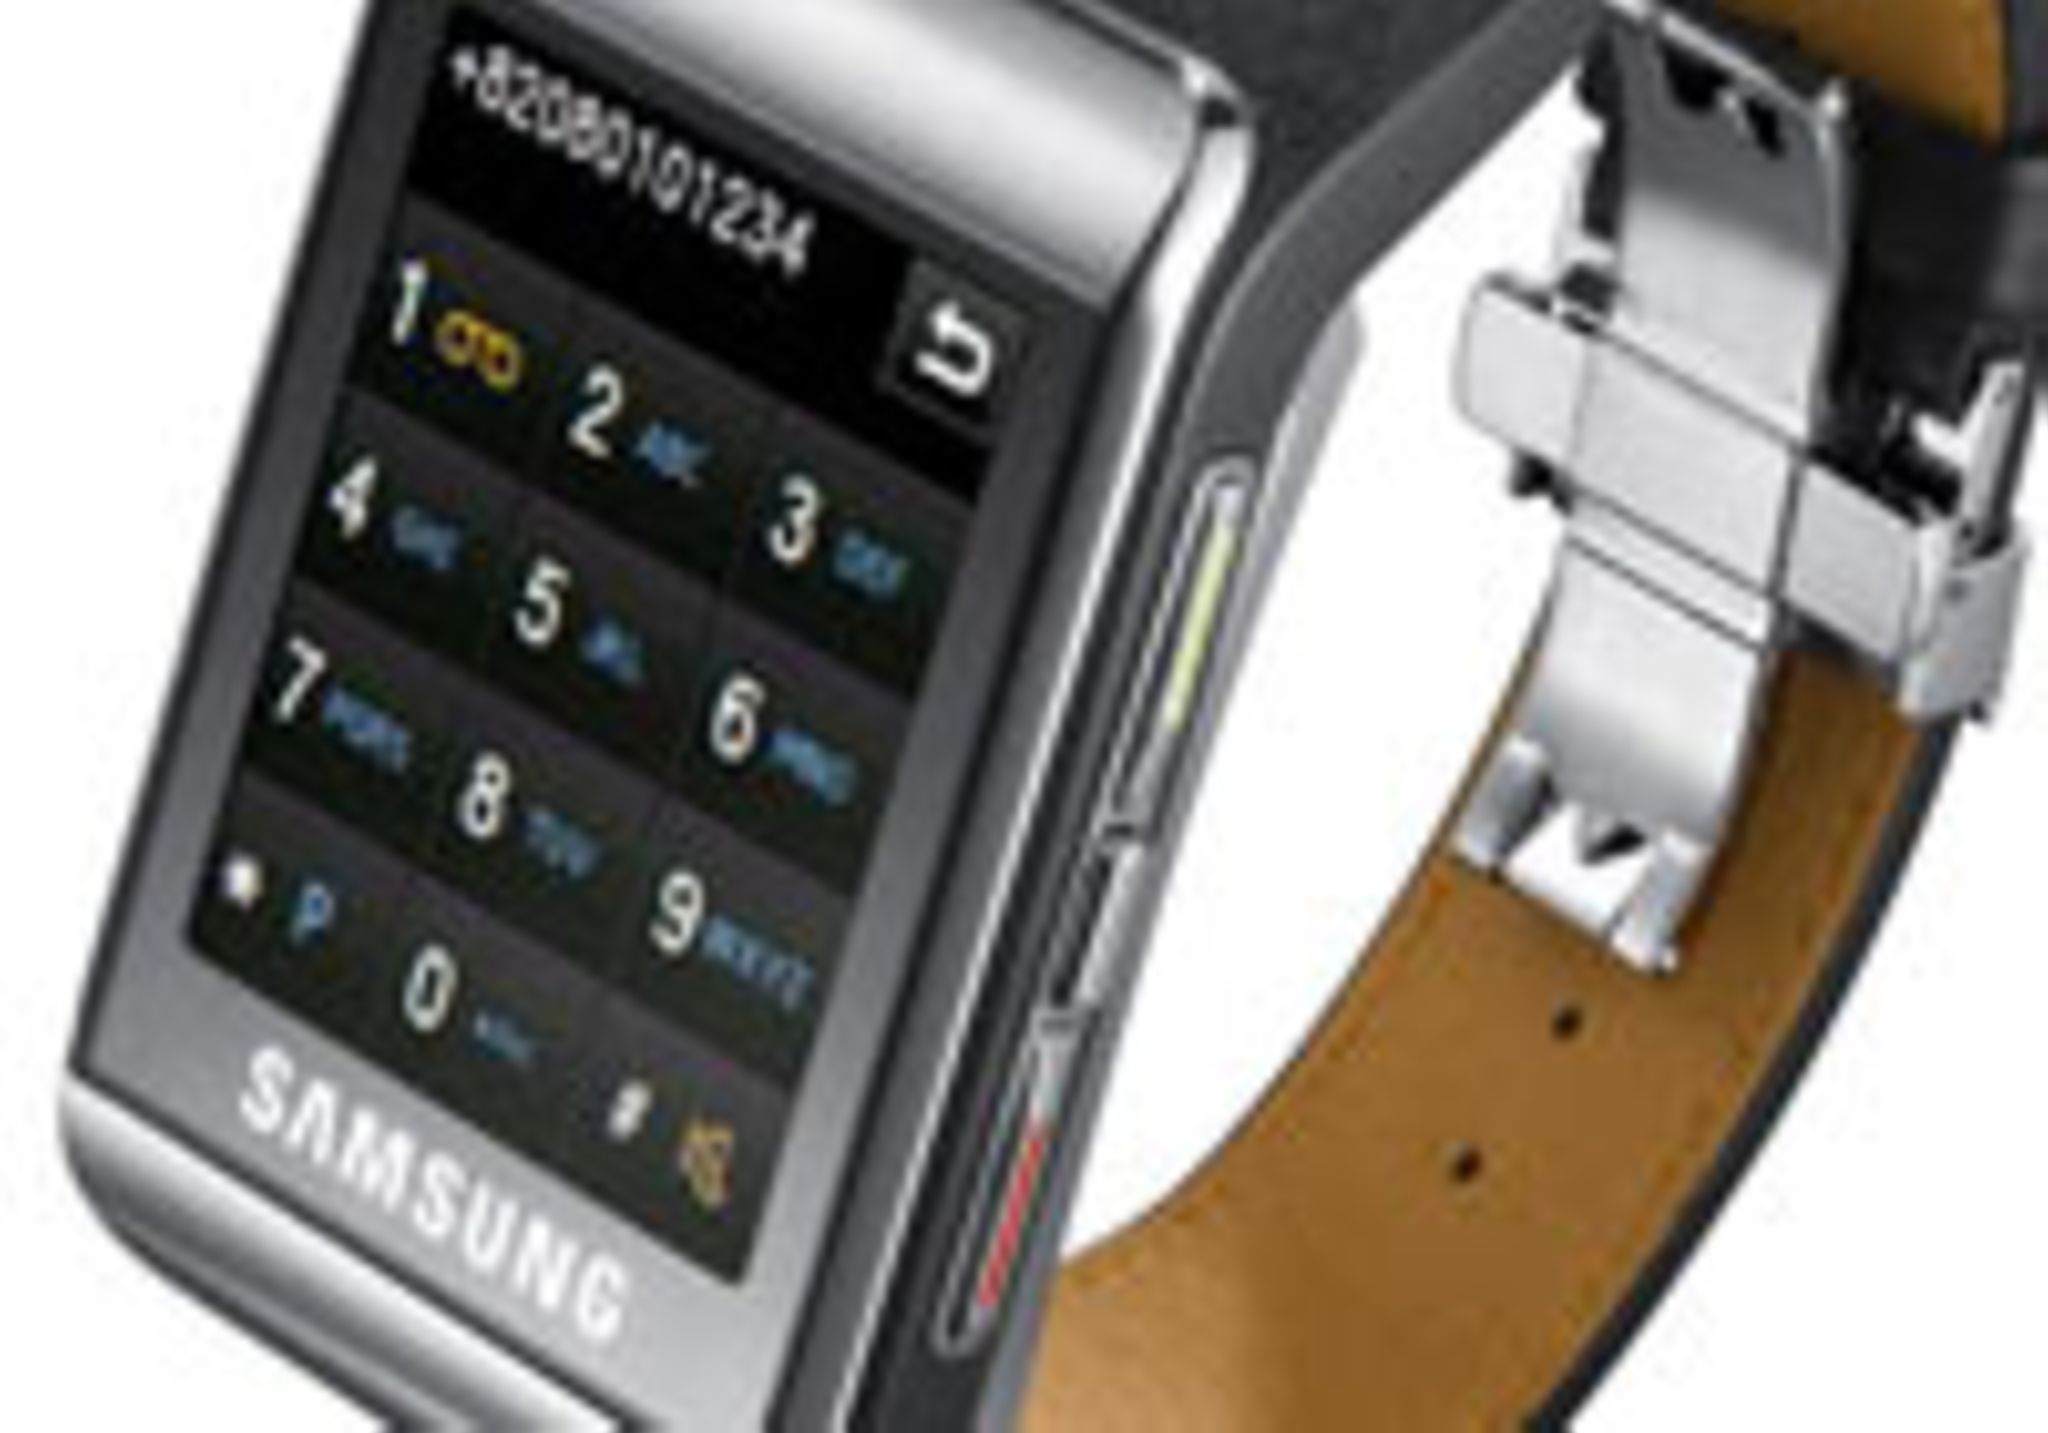 samsung s9110 watch mobile